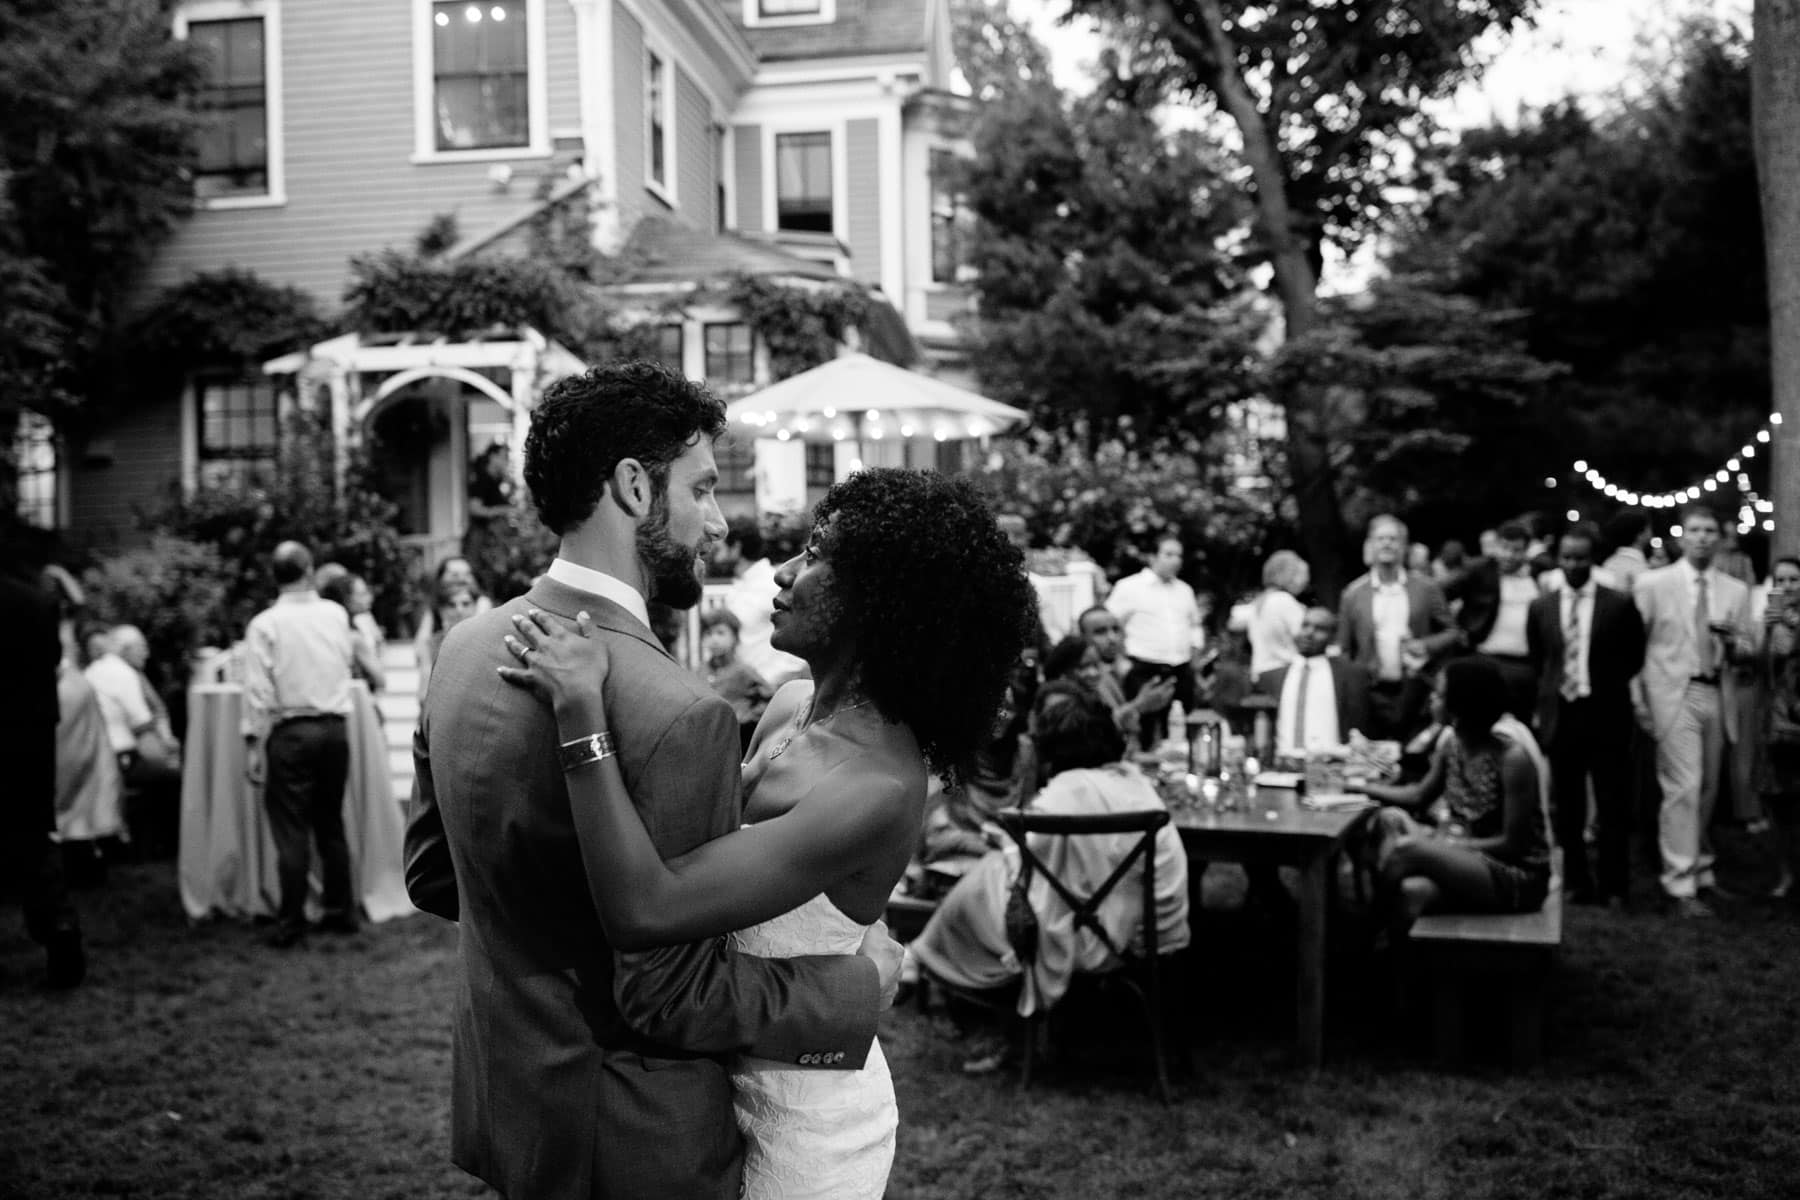 Cambridge wedding photography | a first dance in the backyard at twilight | Kelly Benvenuto Photography